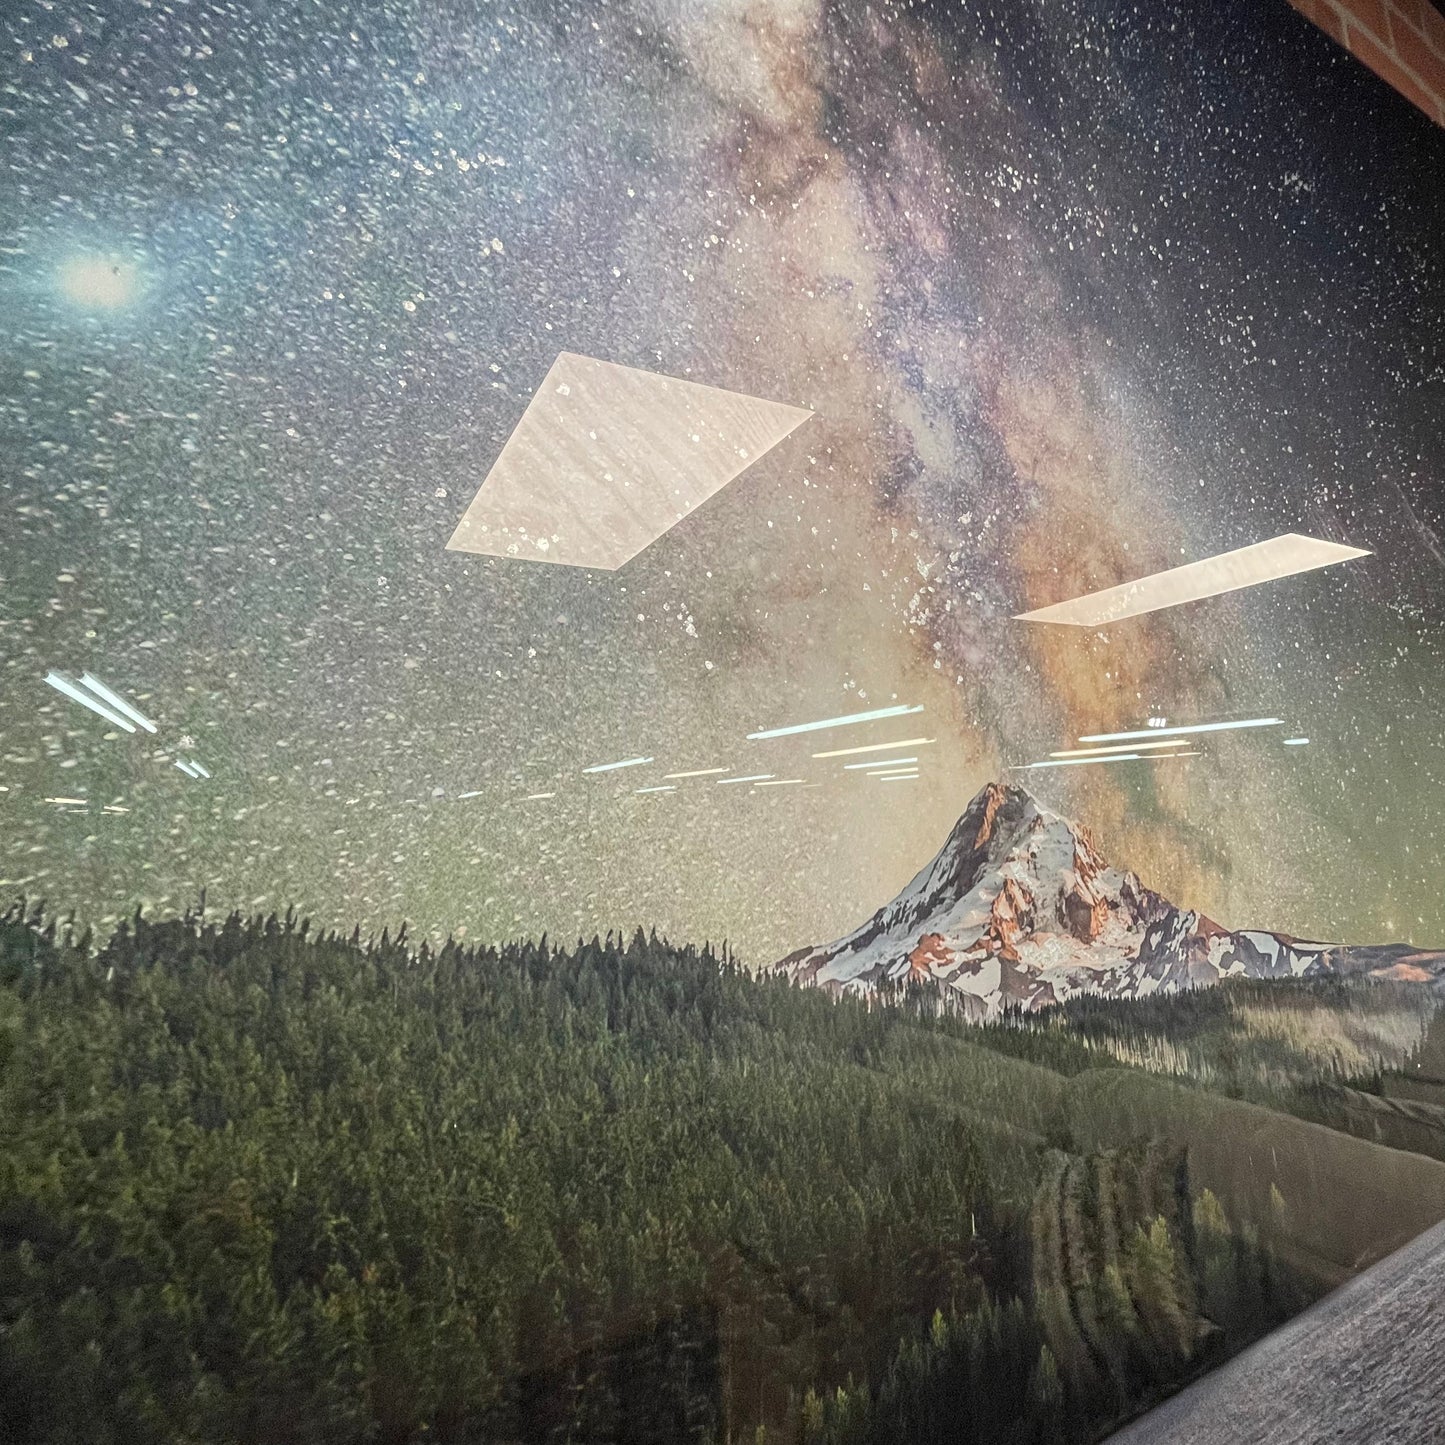 Starry Mountain Tempered Glass w / Foil Wall Art